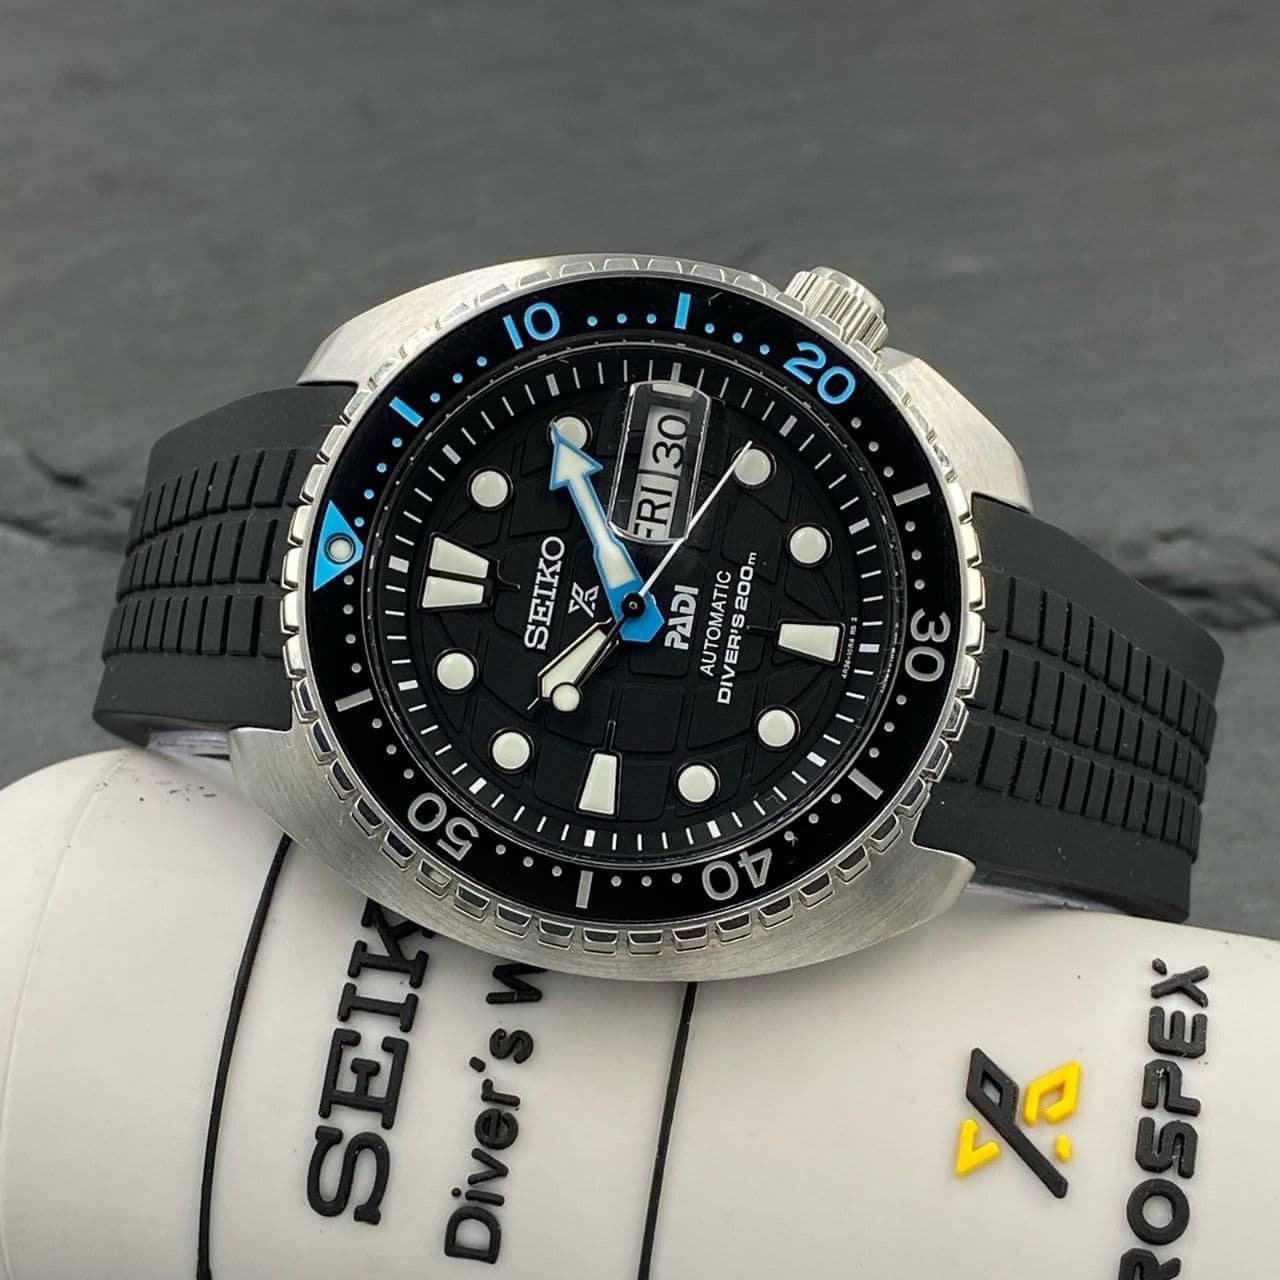 The Seiko King Turtle and Crafter Blue aquanaut style strap